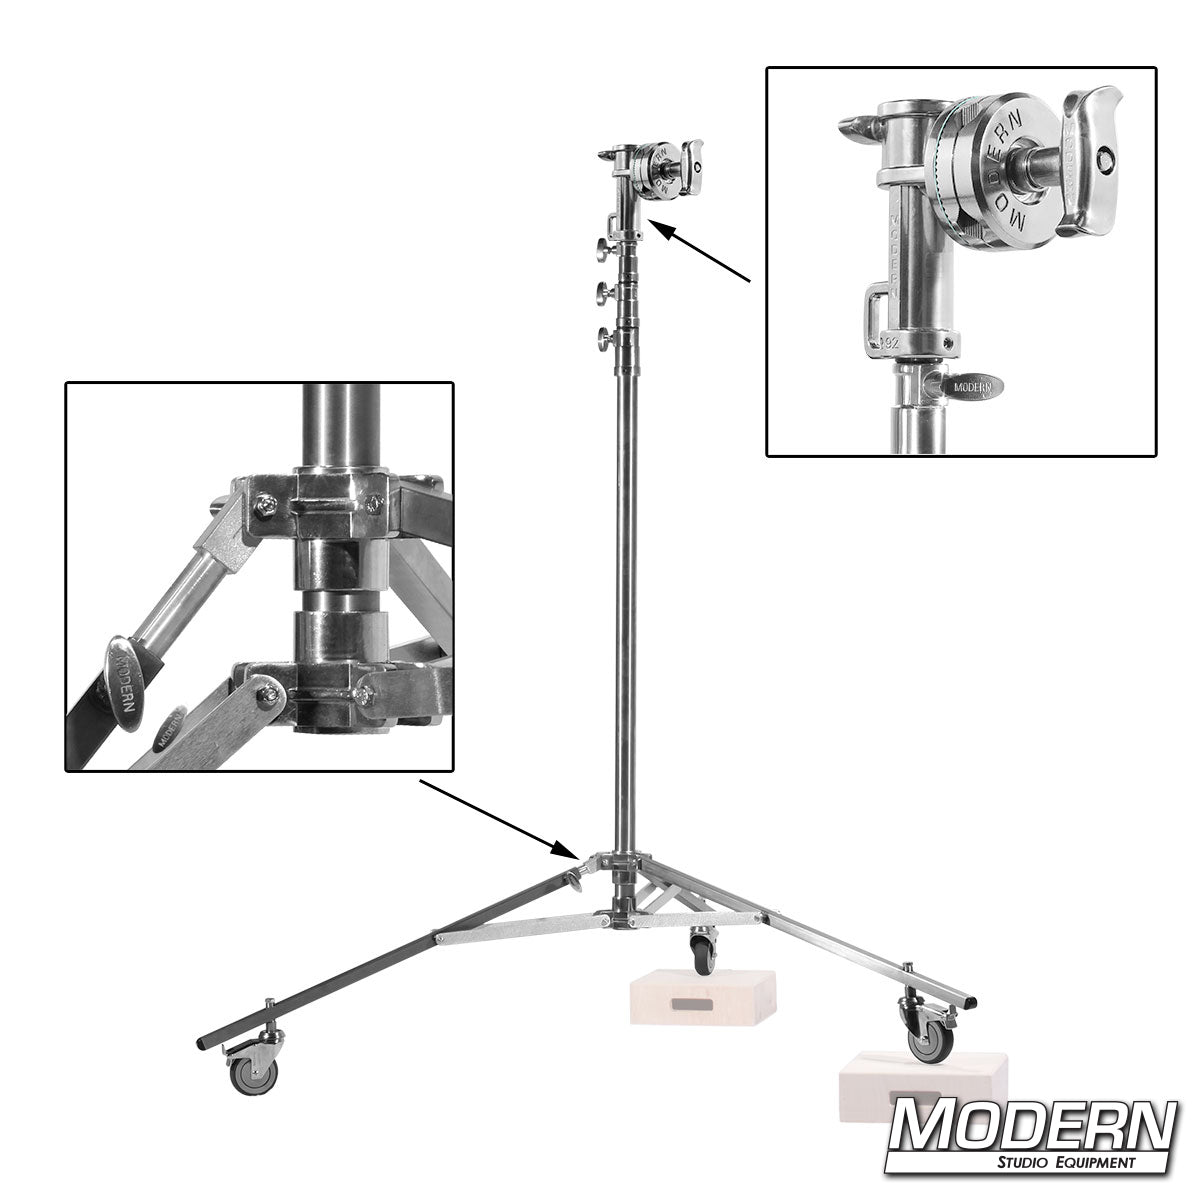 Medium Roller Stand with Rocky Mountain Leg and 4-1/2" Grip Head